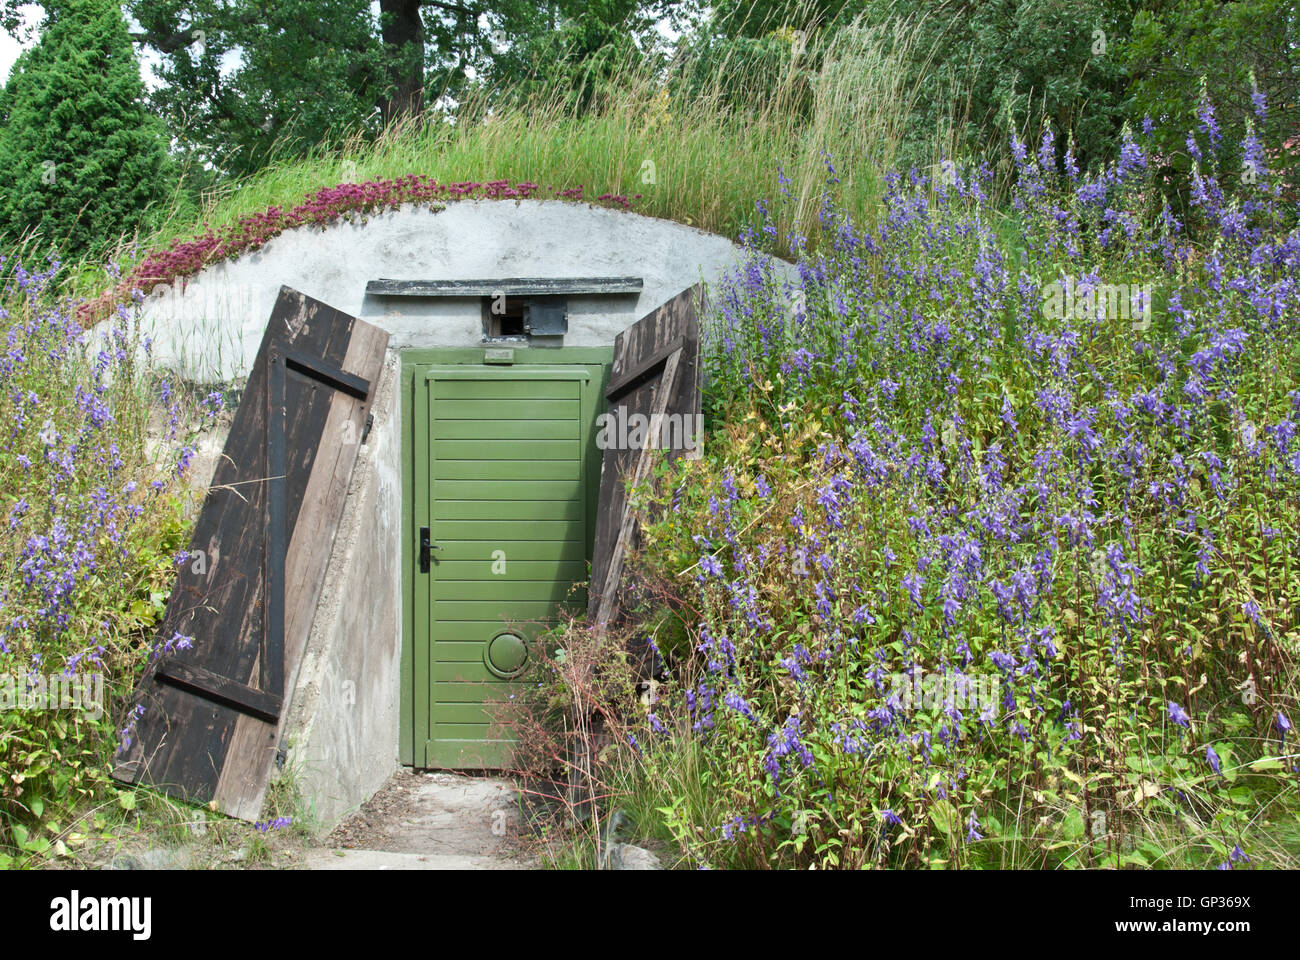 Underground dwelling under a blooming hill Stock Photo